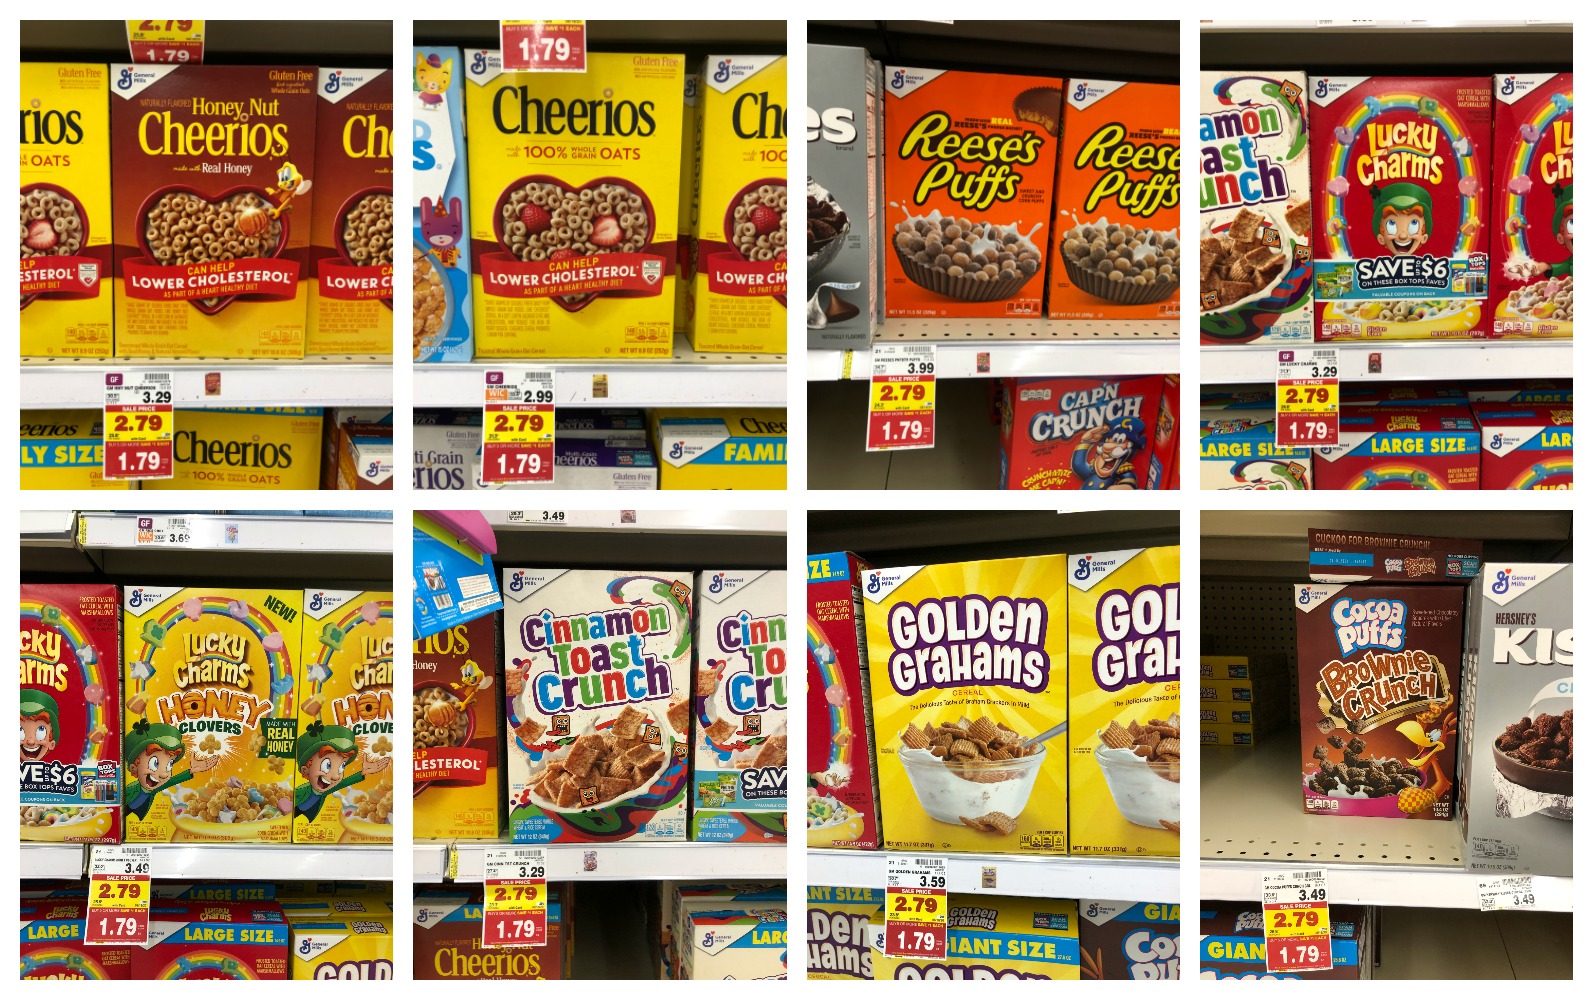 New Coupon General Mills Cereals Only 129 Each With Kroger Mega